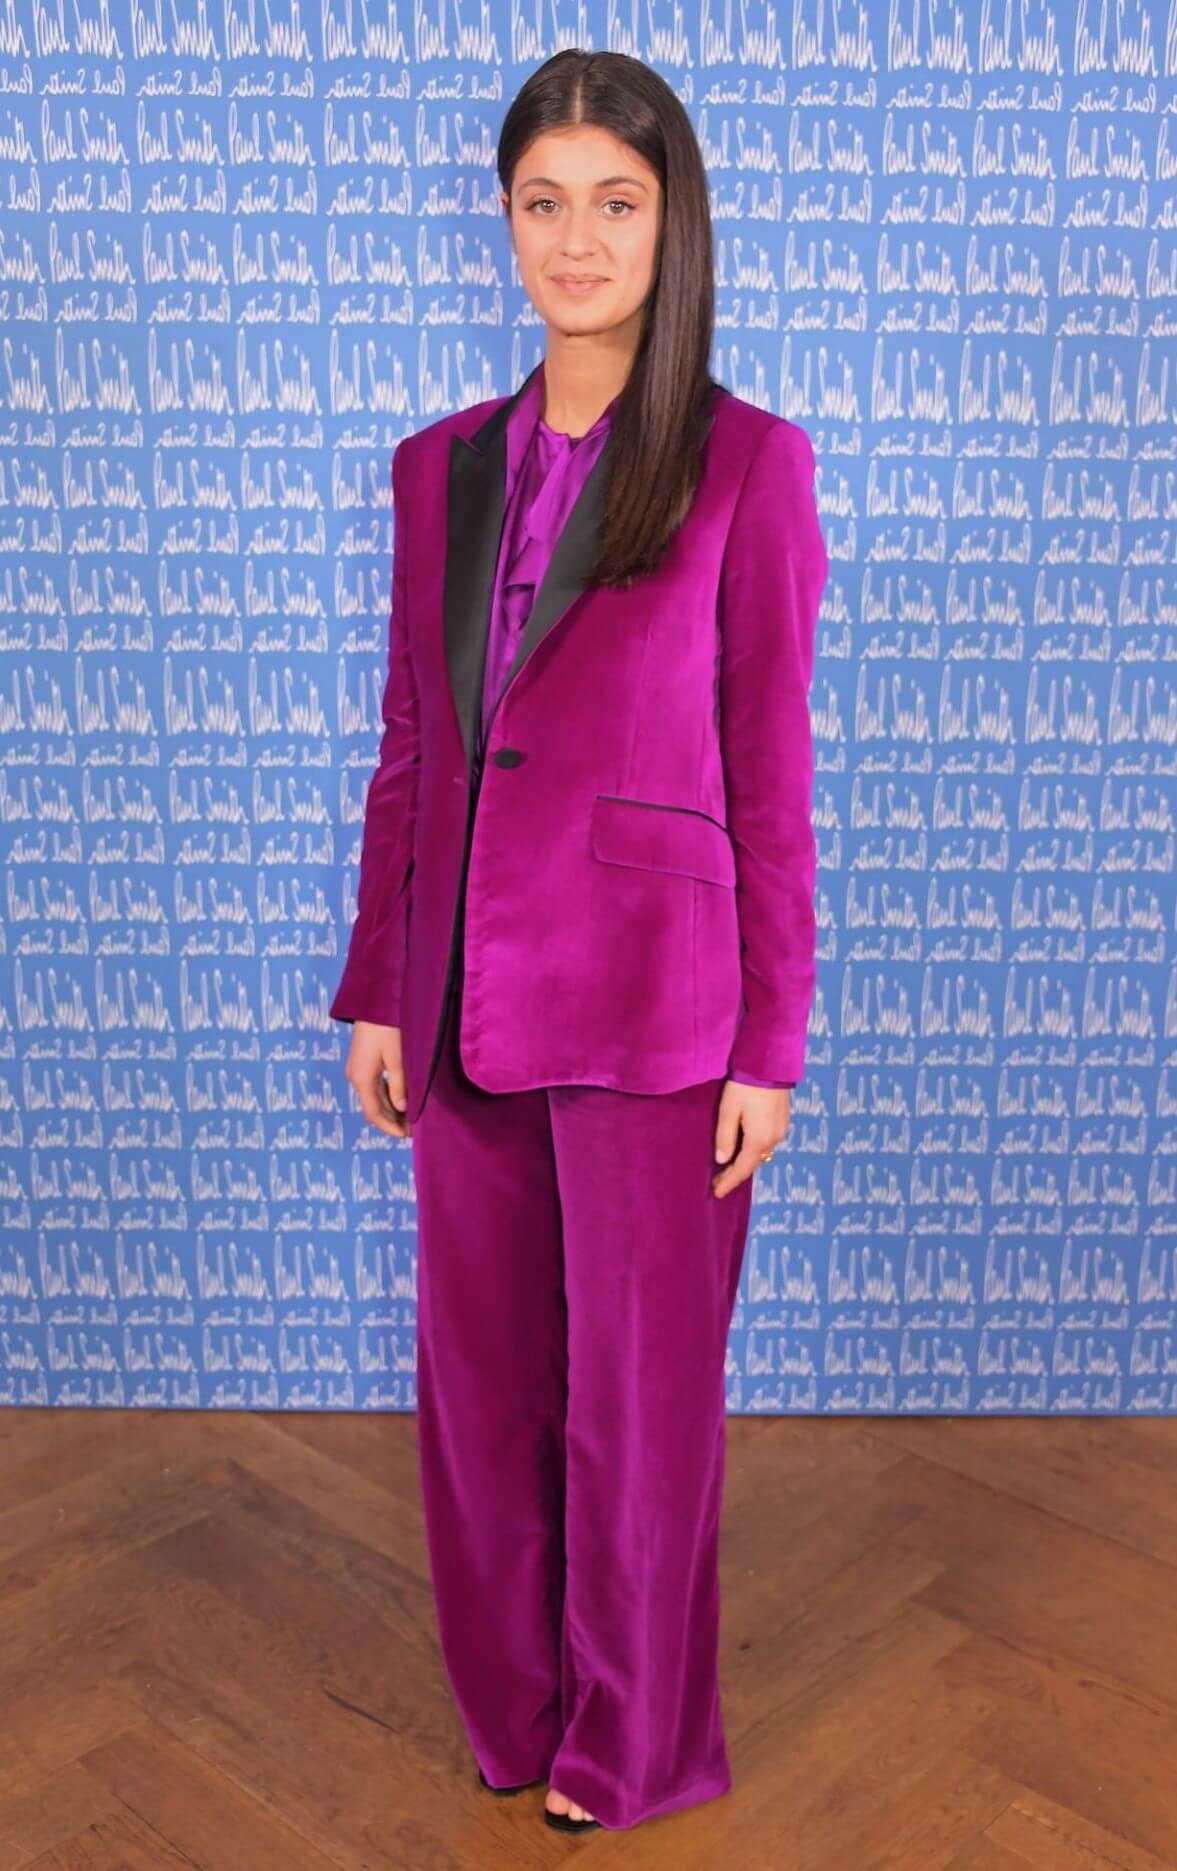 Anya Chalotra In Pink Long Pants Blazer Outfits At Paul Smith AW20 50th Anniversary Show in Paris